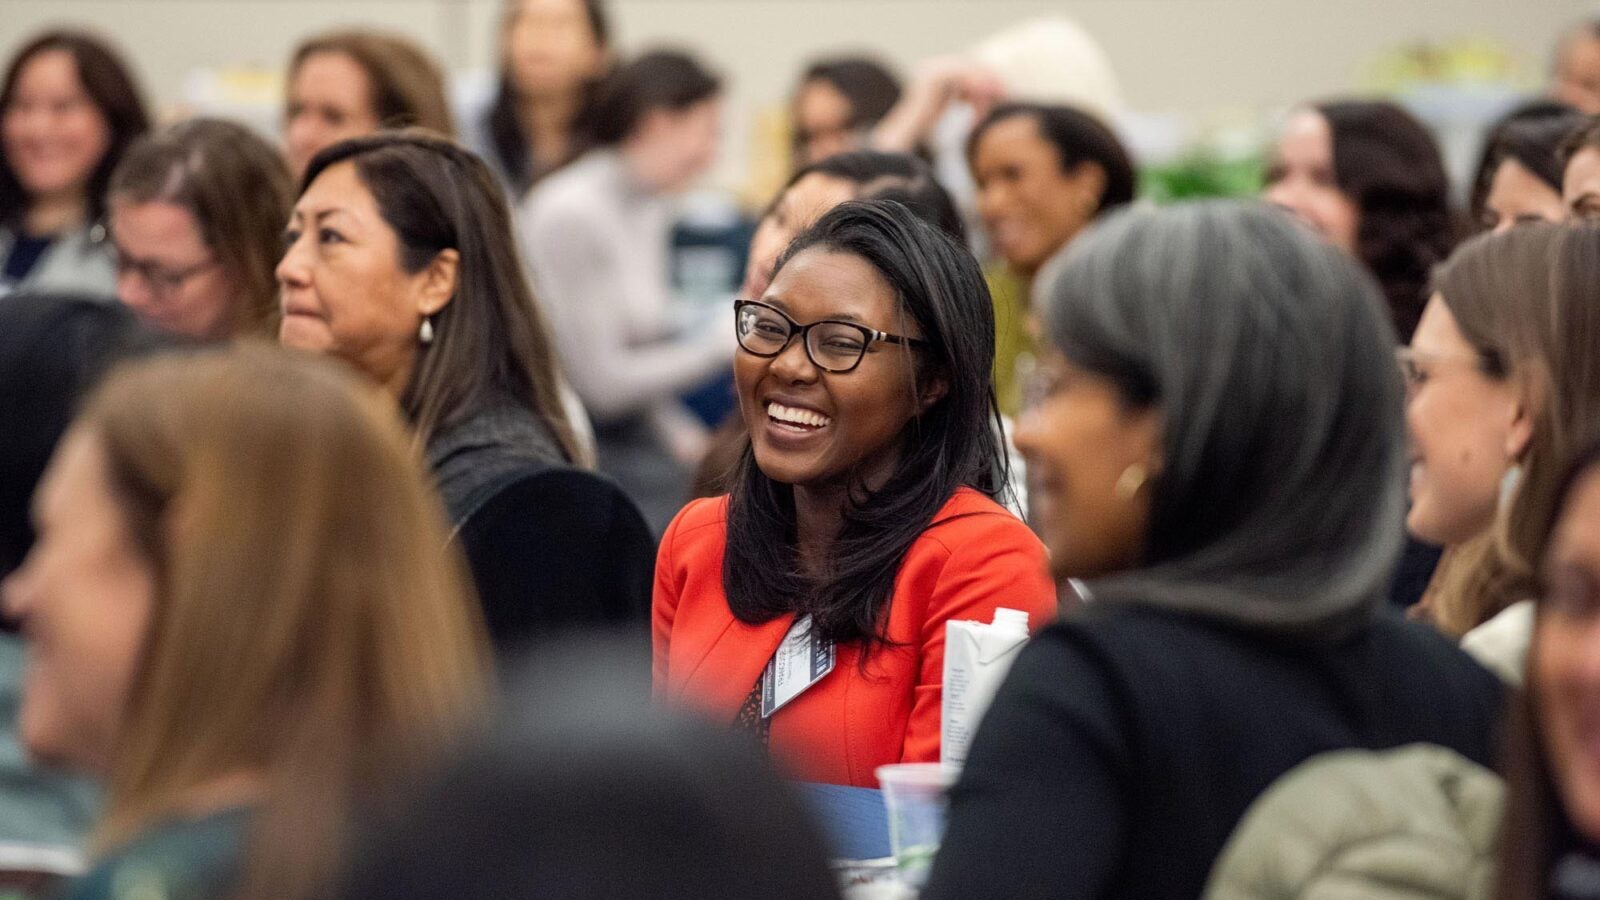 attendees at the Georgetown University Women’s Forum in 2019